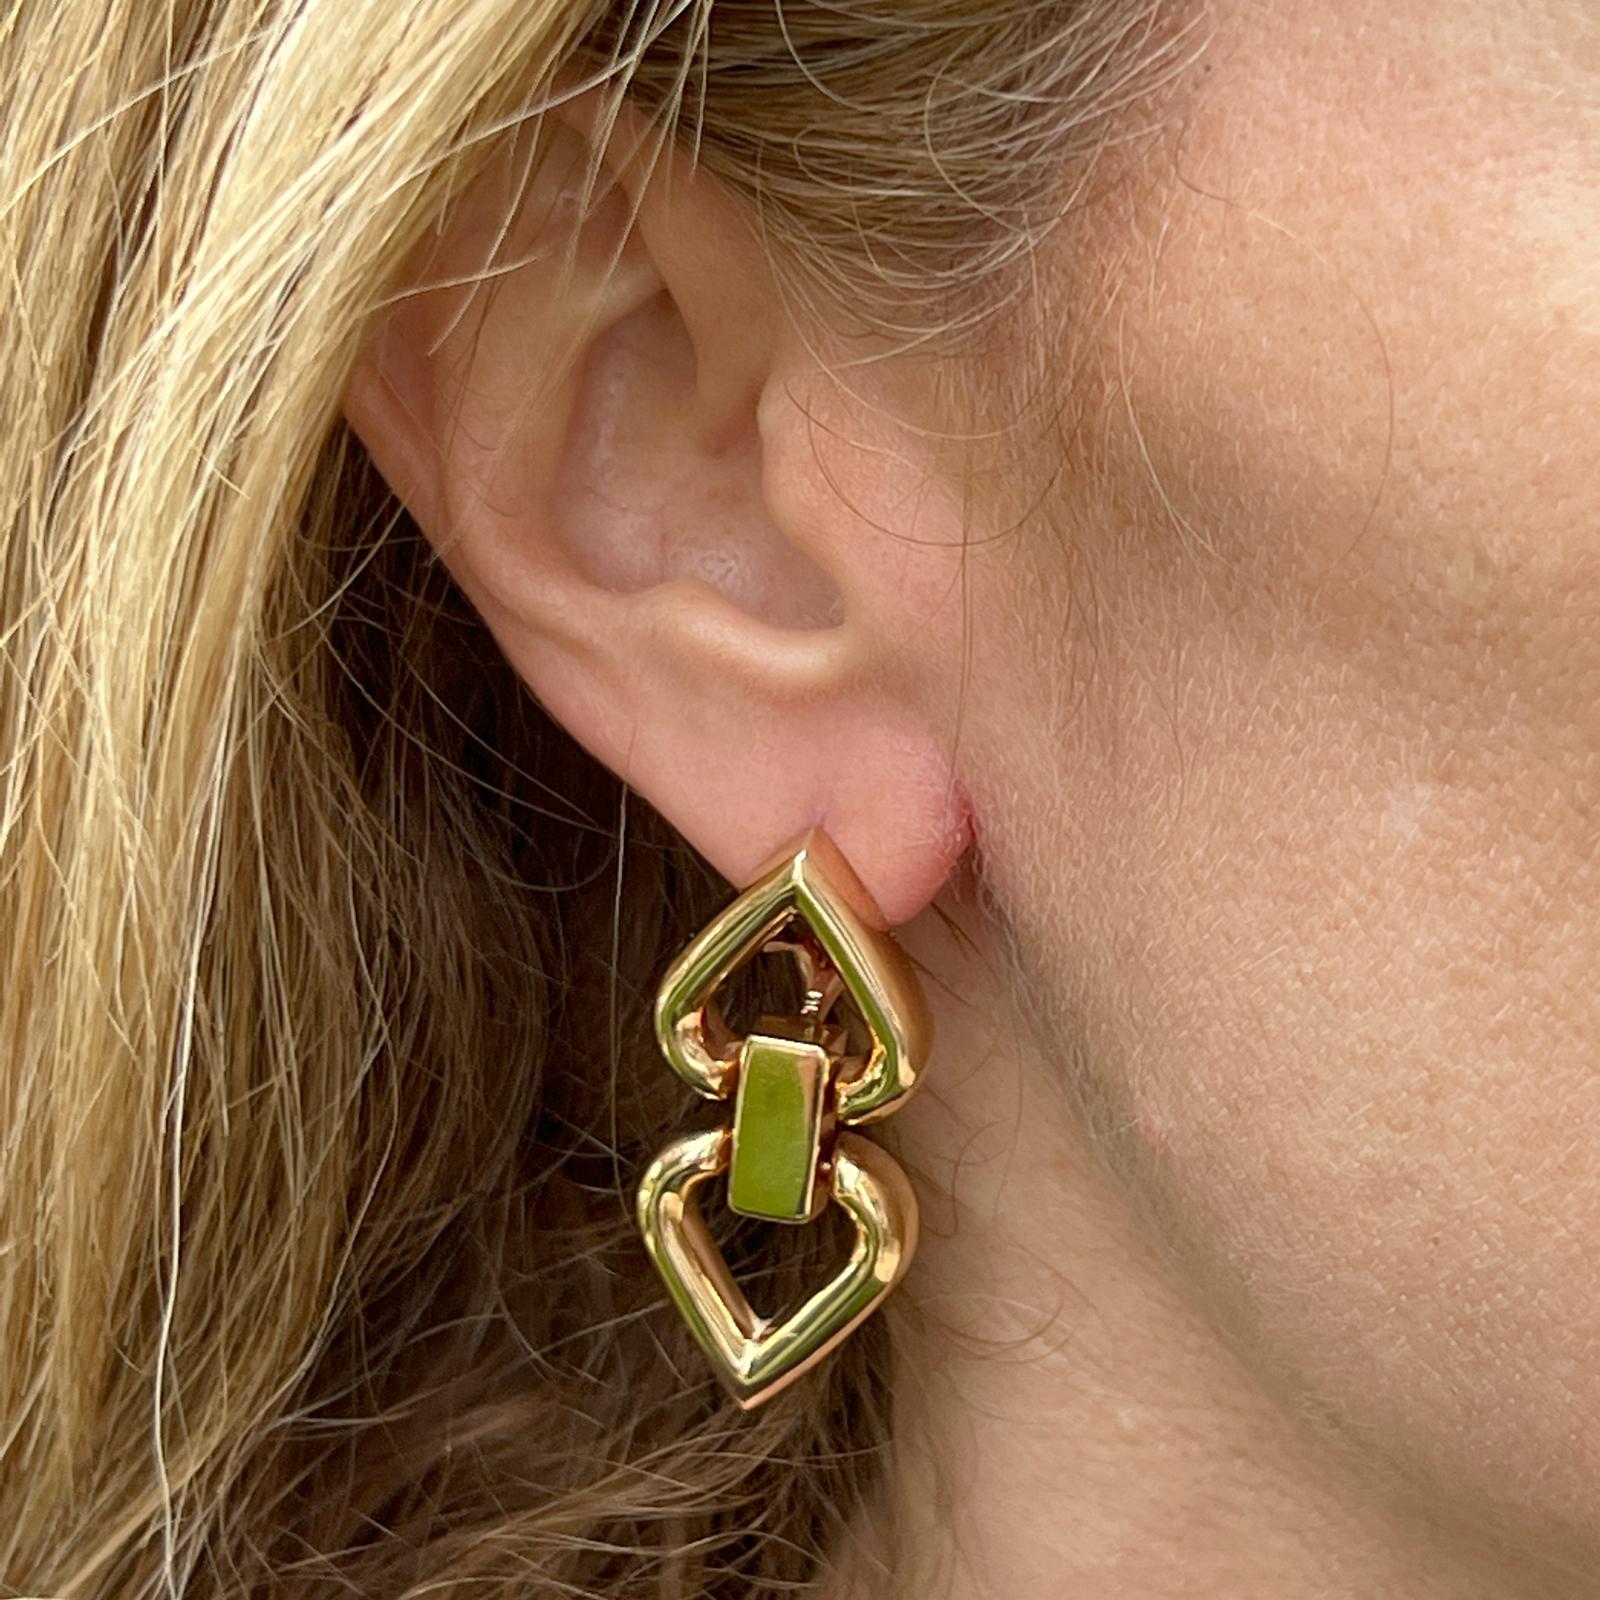 Great everyday door knocker earrings fashioned in 14 karat yellow gold. The spade shape drop earrings feature leverbacks, and measure 1.60 x .75 inches. 